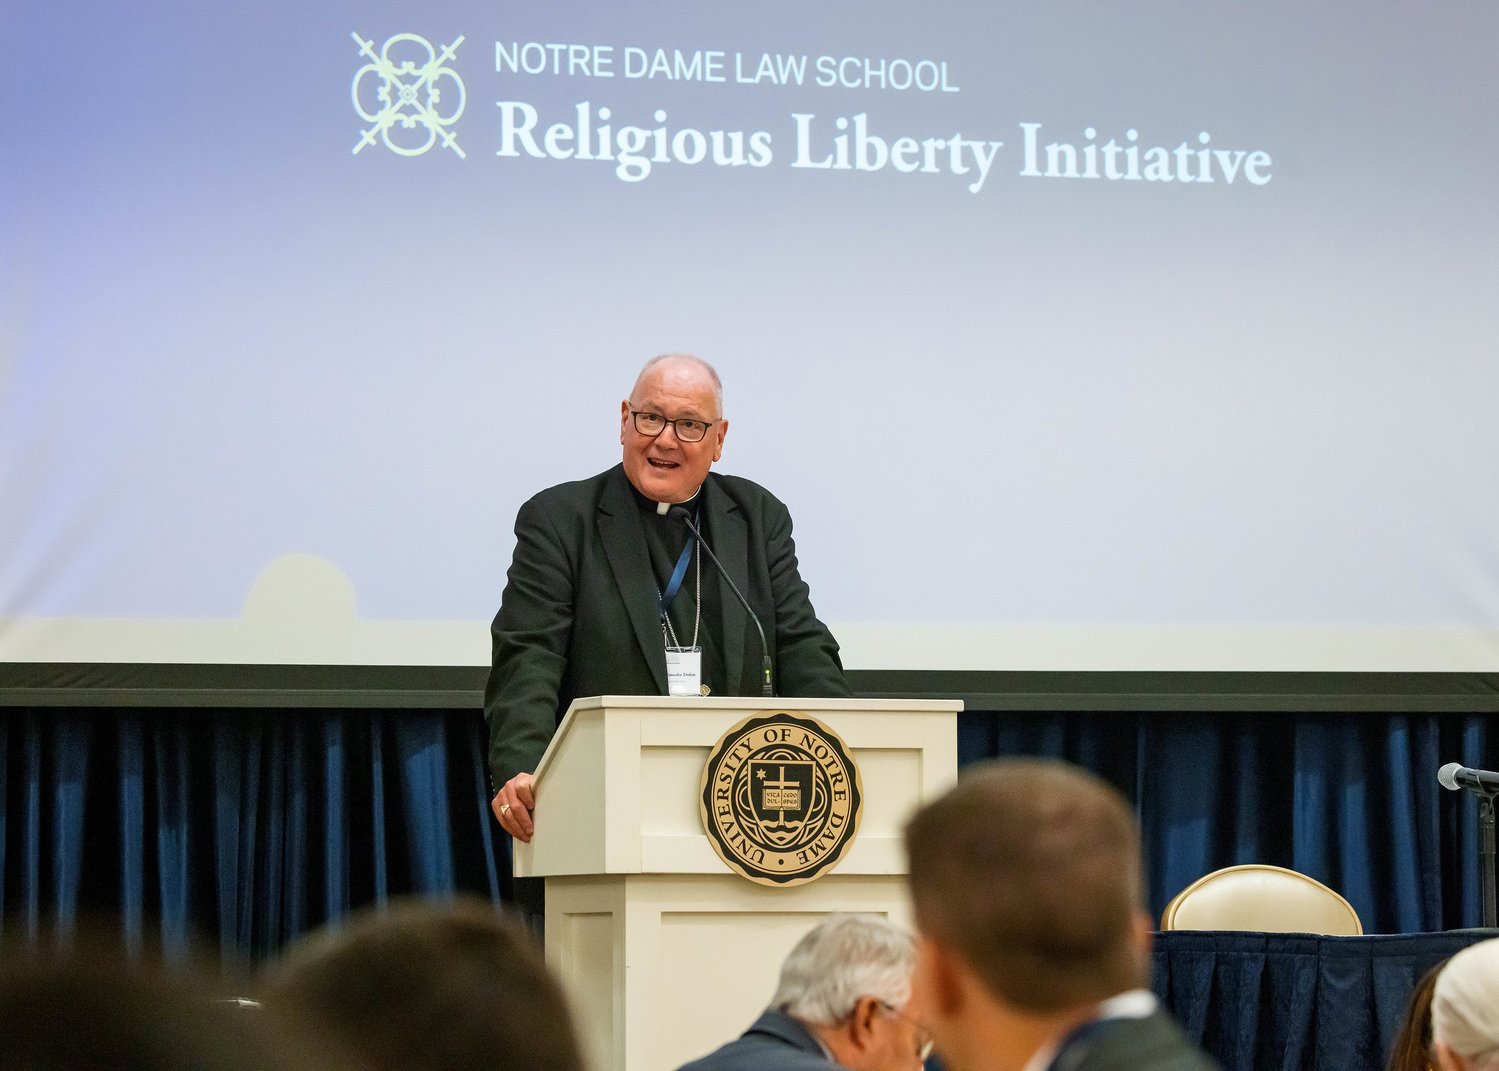 Cardinal Timothy M. Dolan, chairman of the U.S. Conference of Catholic Bishops' Committee for Religious Liberty, presents the keynote address June 28, during the Religious Liberty Summit at the University of Notre Dame Law School.